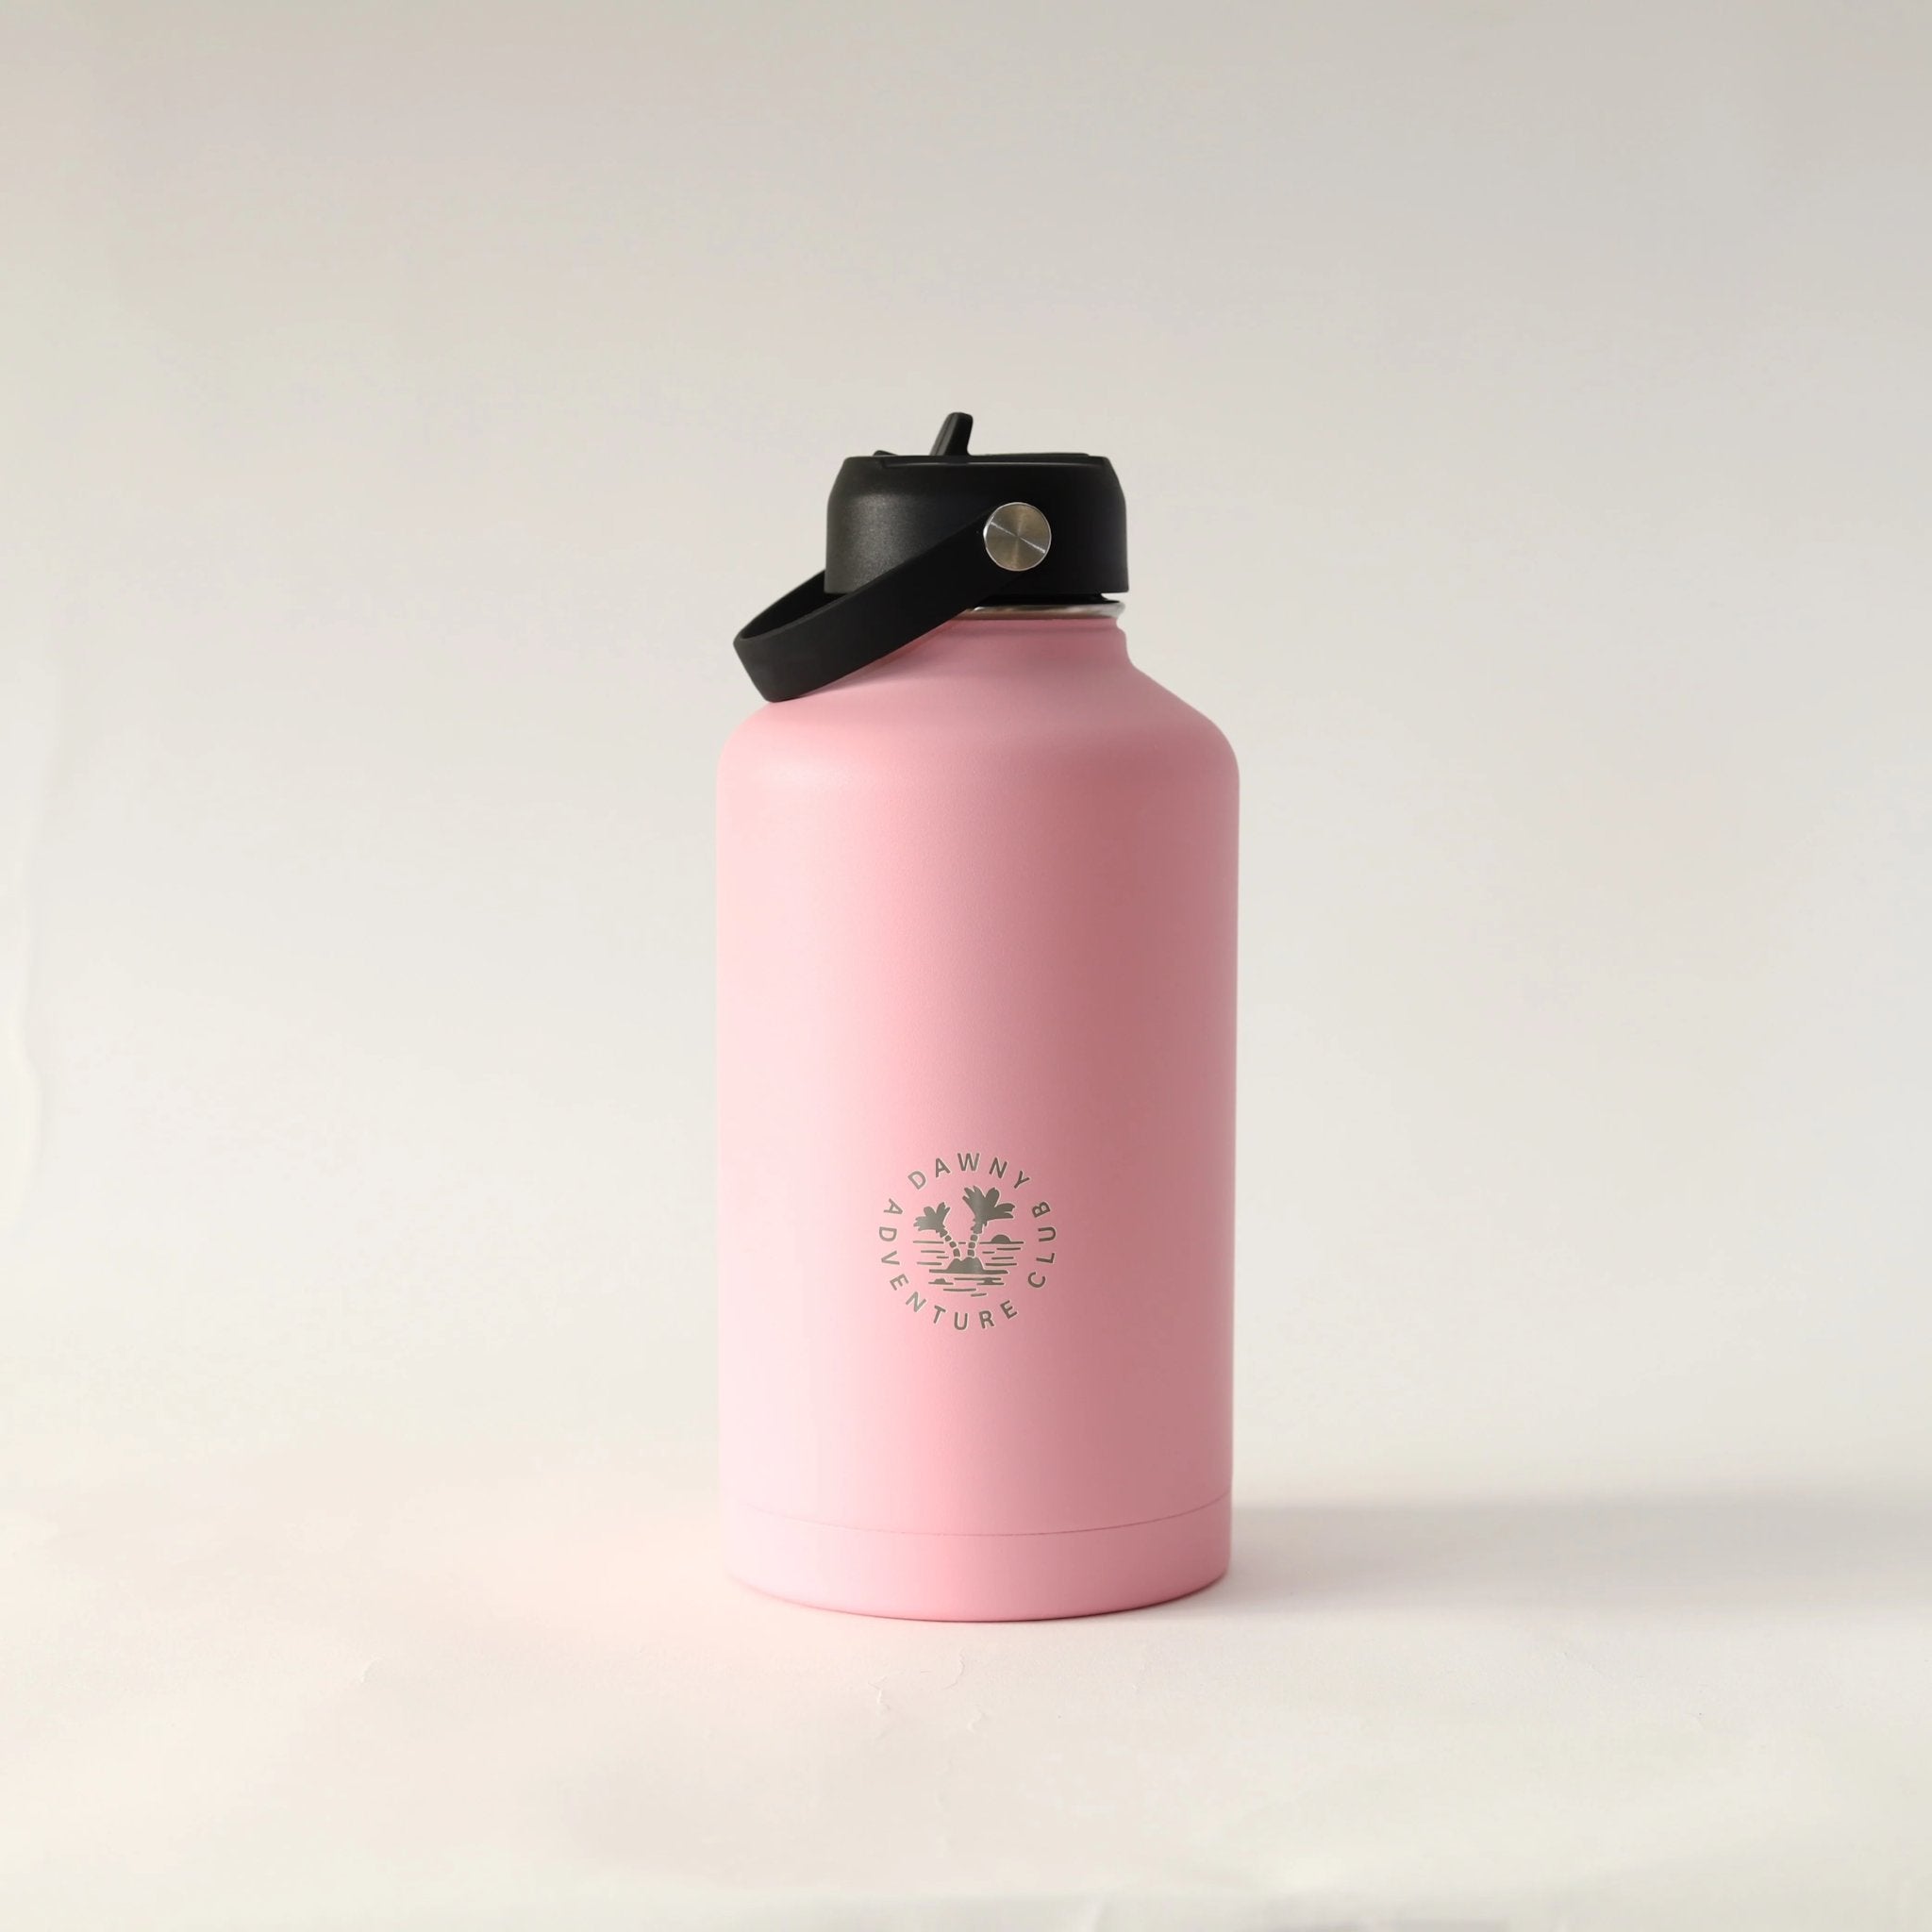 1900ml Pink Dawny Adventure Club Drink Bottle with sipper lid with swing handle